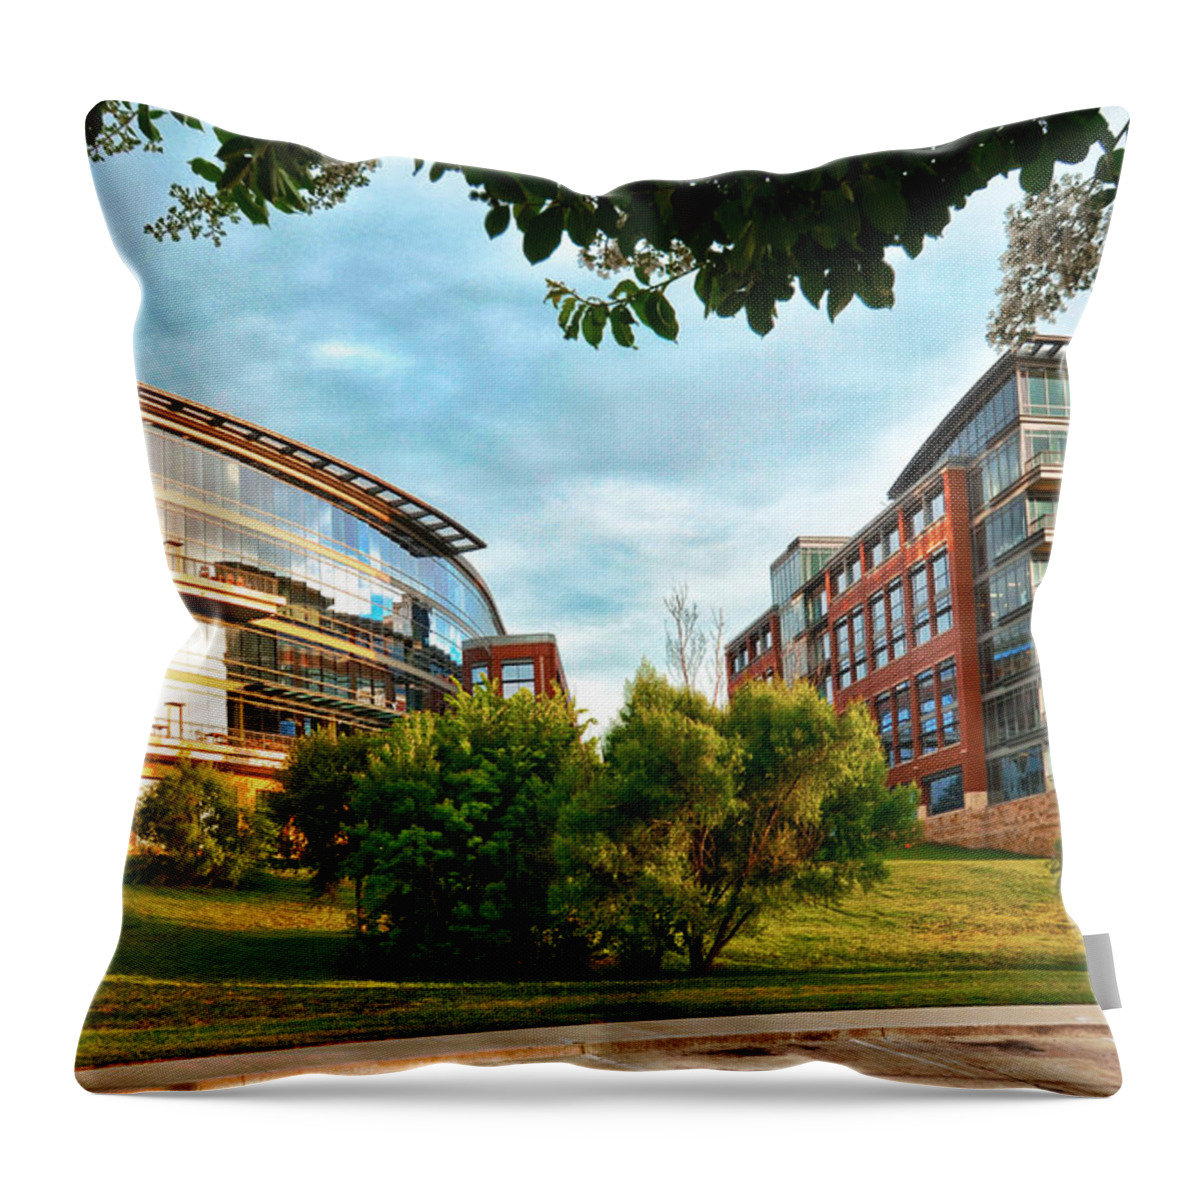 Fort Worth Throw Pillow featuring the photograph Architecture in Fort Worth by Ricardo J Ruiz de Porras